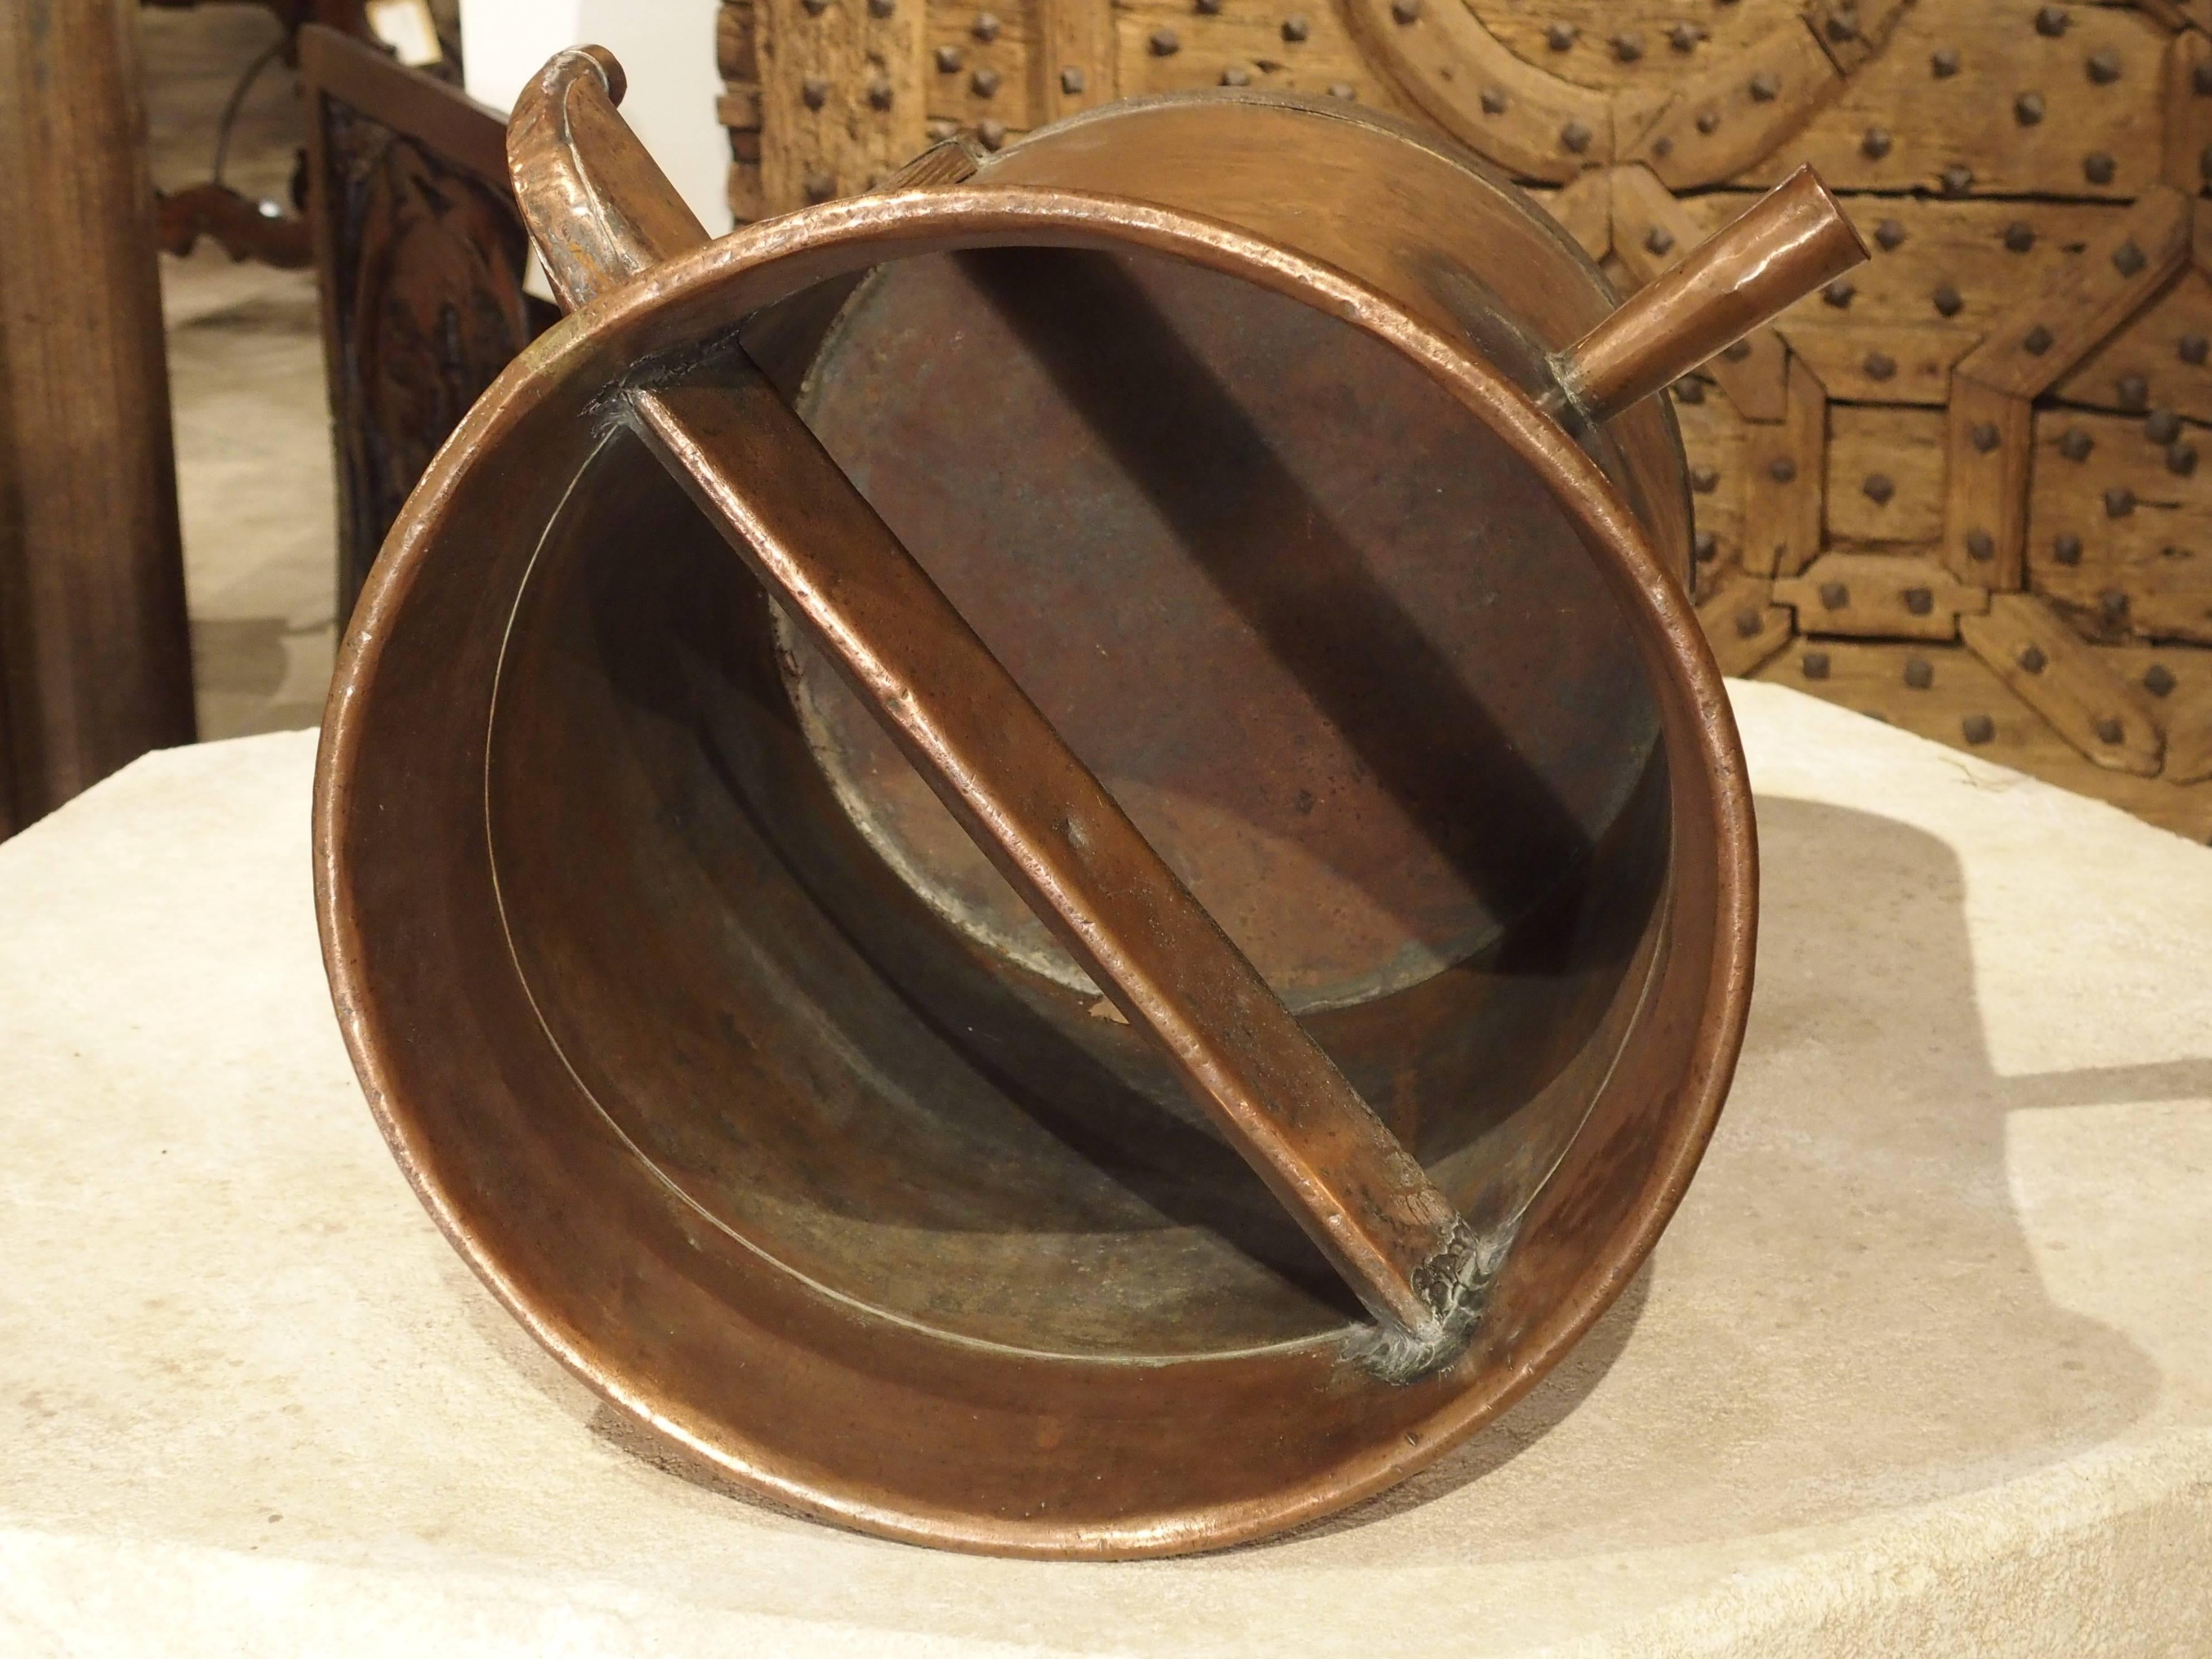 French Antique Copper 50 Liter Wine Vessel from Carcassonne France, circa 1850